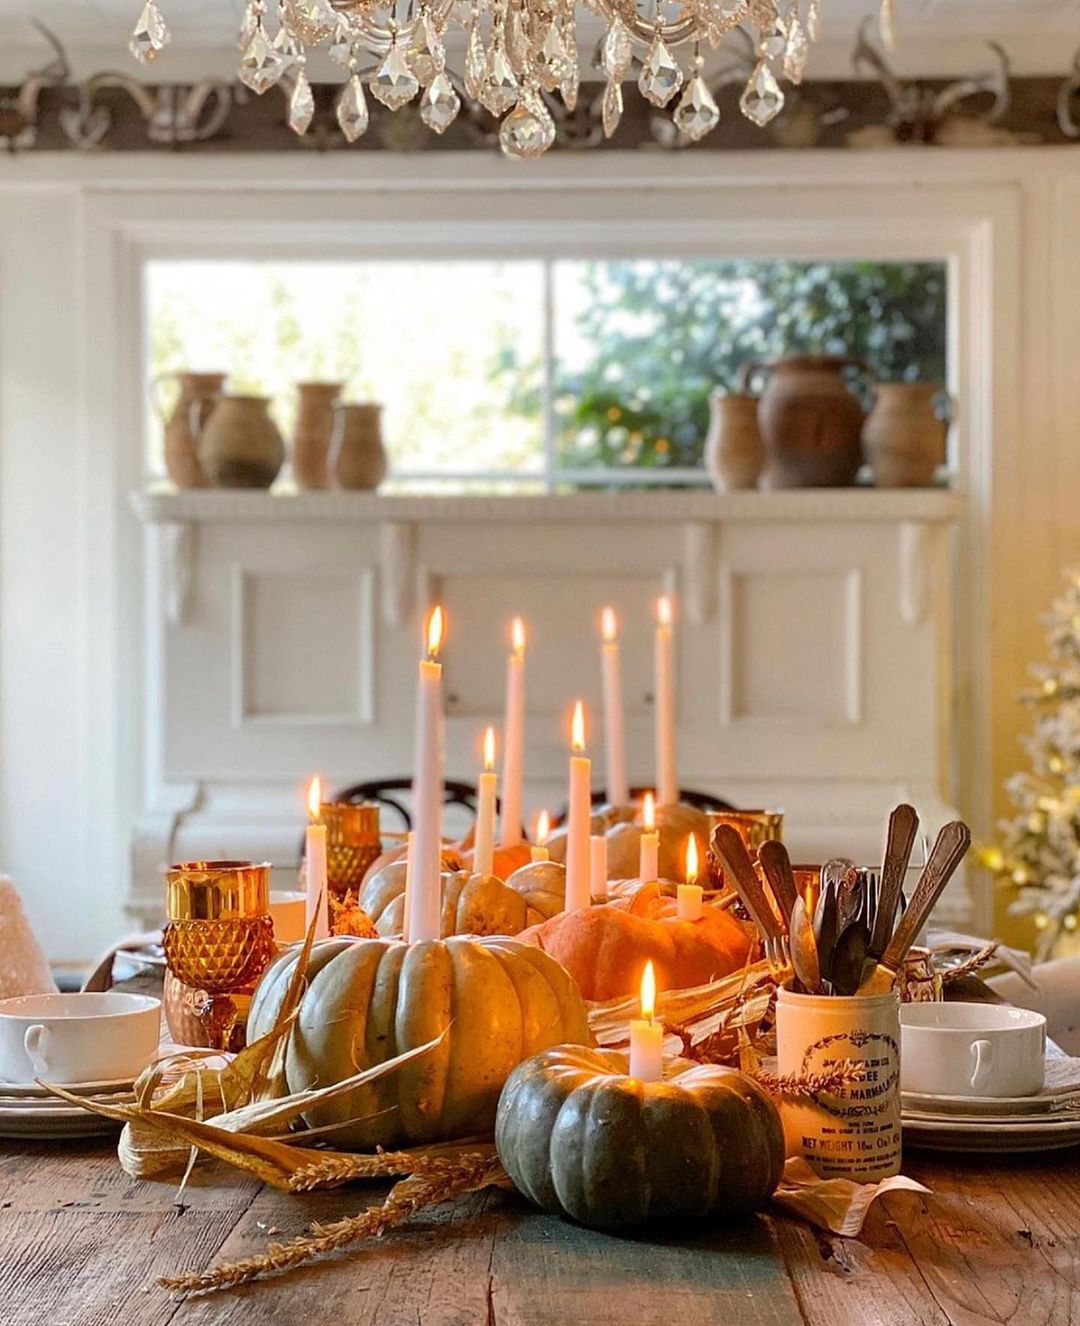 Table setting with pumpkins and other gourds being used as candleholders. Photo by Instagram user @toni_marianna.